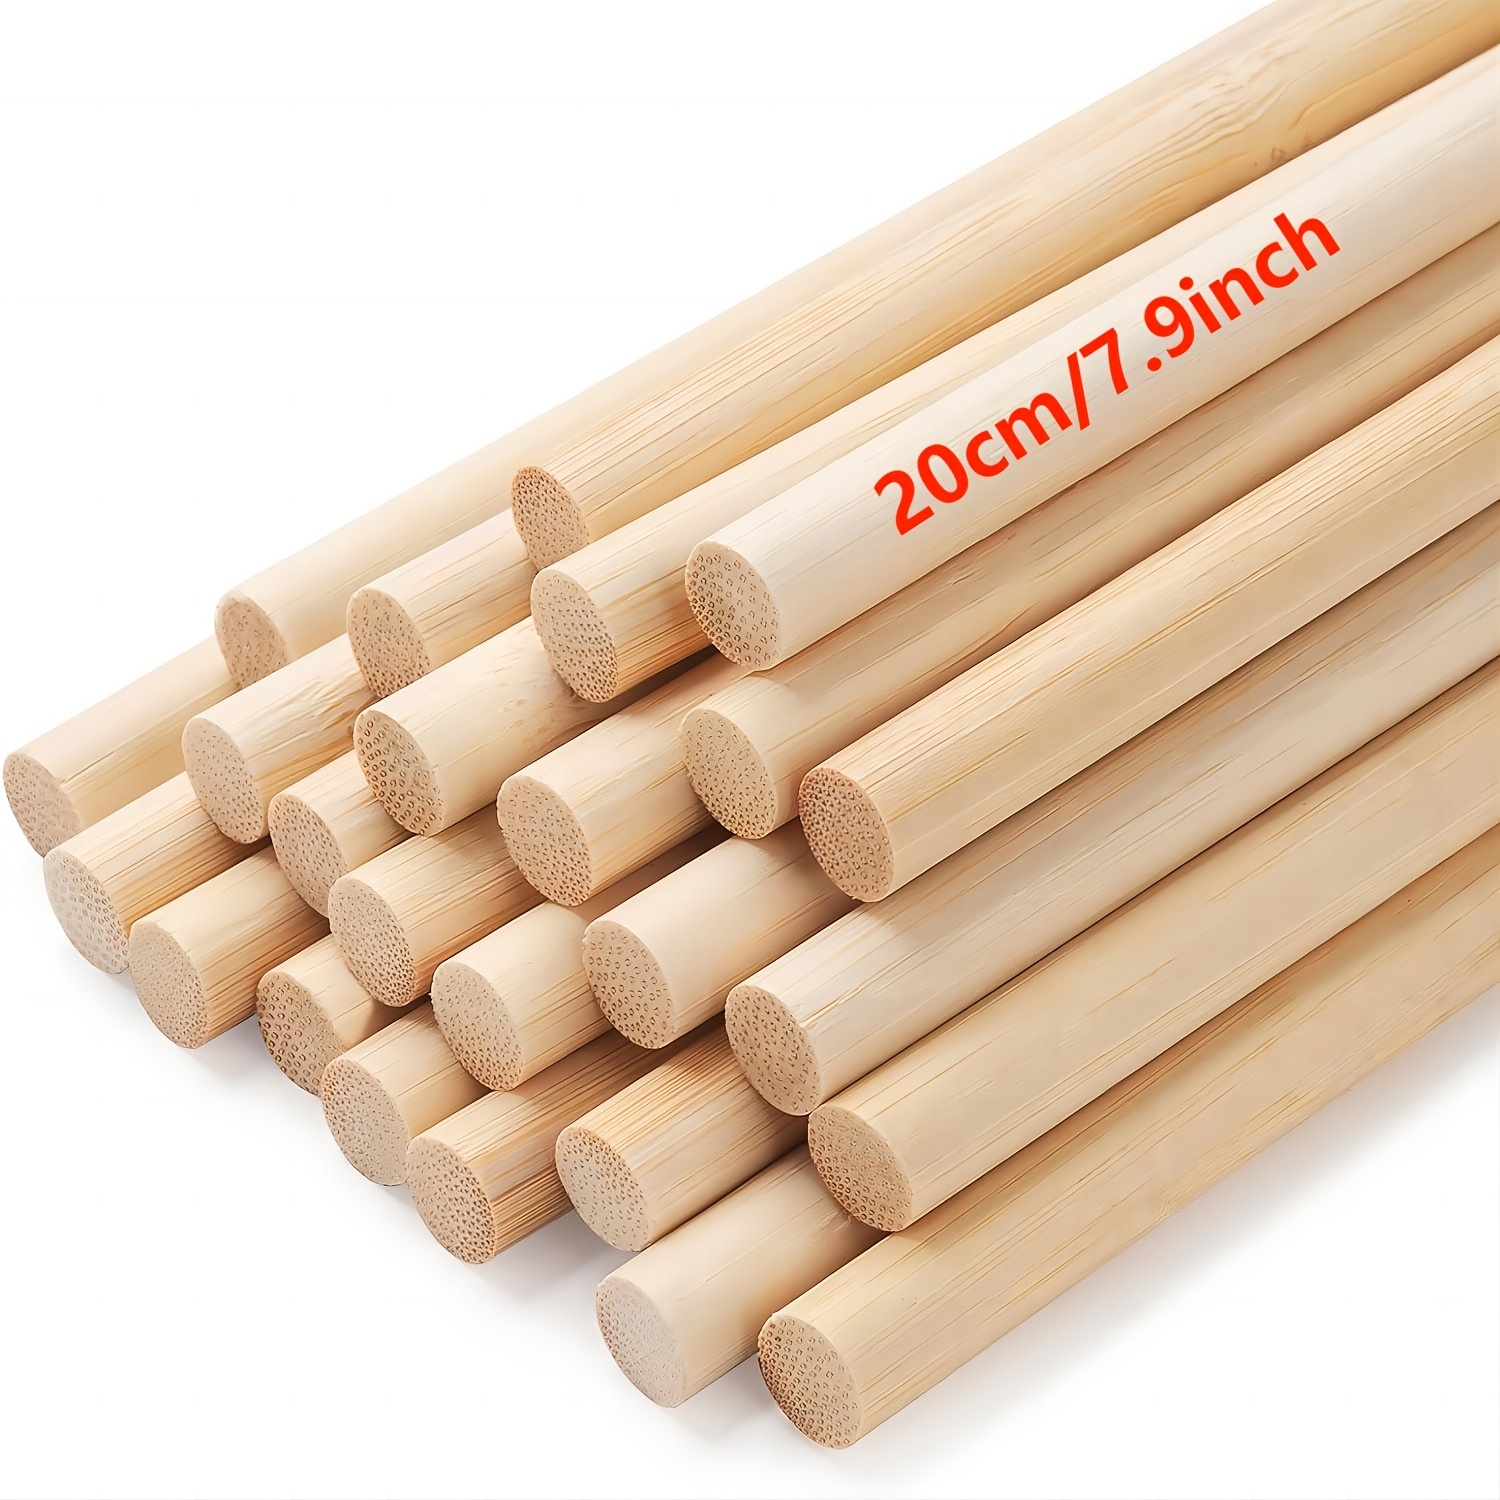 1/4 x 12 Wooden Sticks for Crafts Wooden Dowel Rods Round Wood Dowels,  20PCS Wooden Lollipops and Tiered Cake Dowel Rods, Small Unfinished  Hardwood